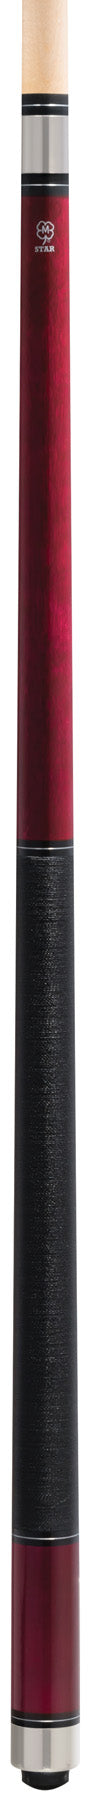 McDermott Star S80 58 in. Pool Cue Stick + Free Soft Case